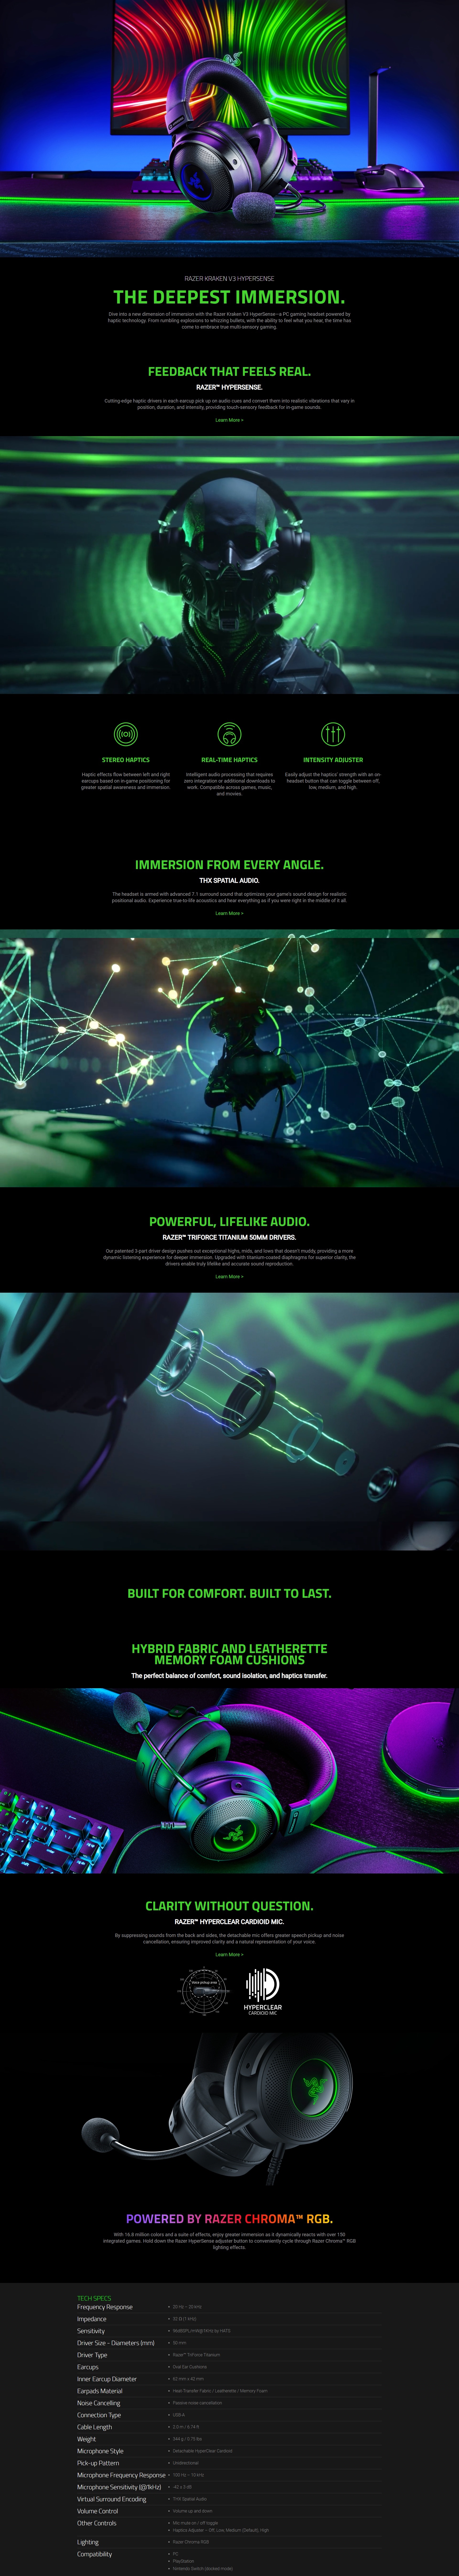 A large marketing image providing additional information about the product Razer Kraken V3 - Wired USB Gaming Headset with HyperSense - Additional alt info not provided